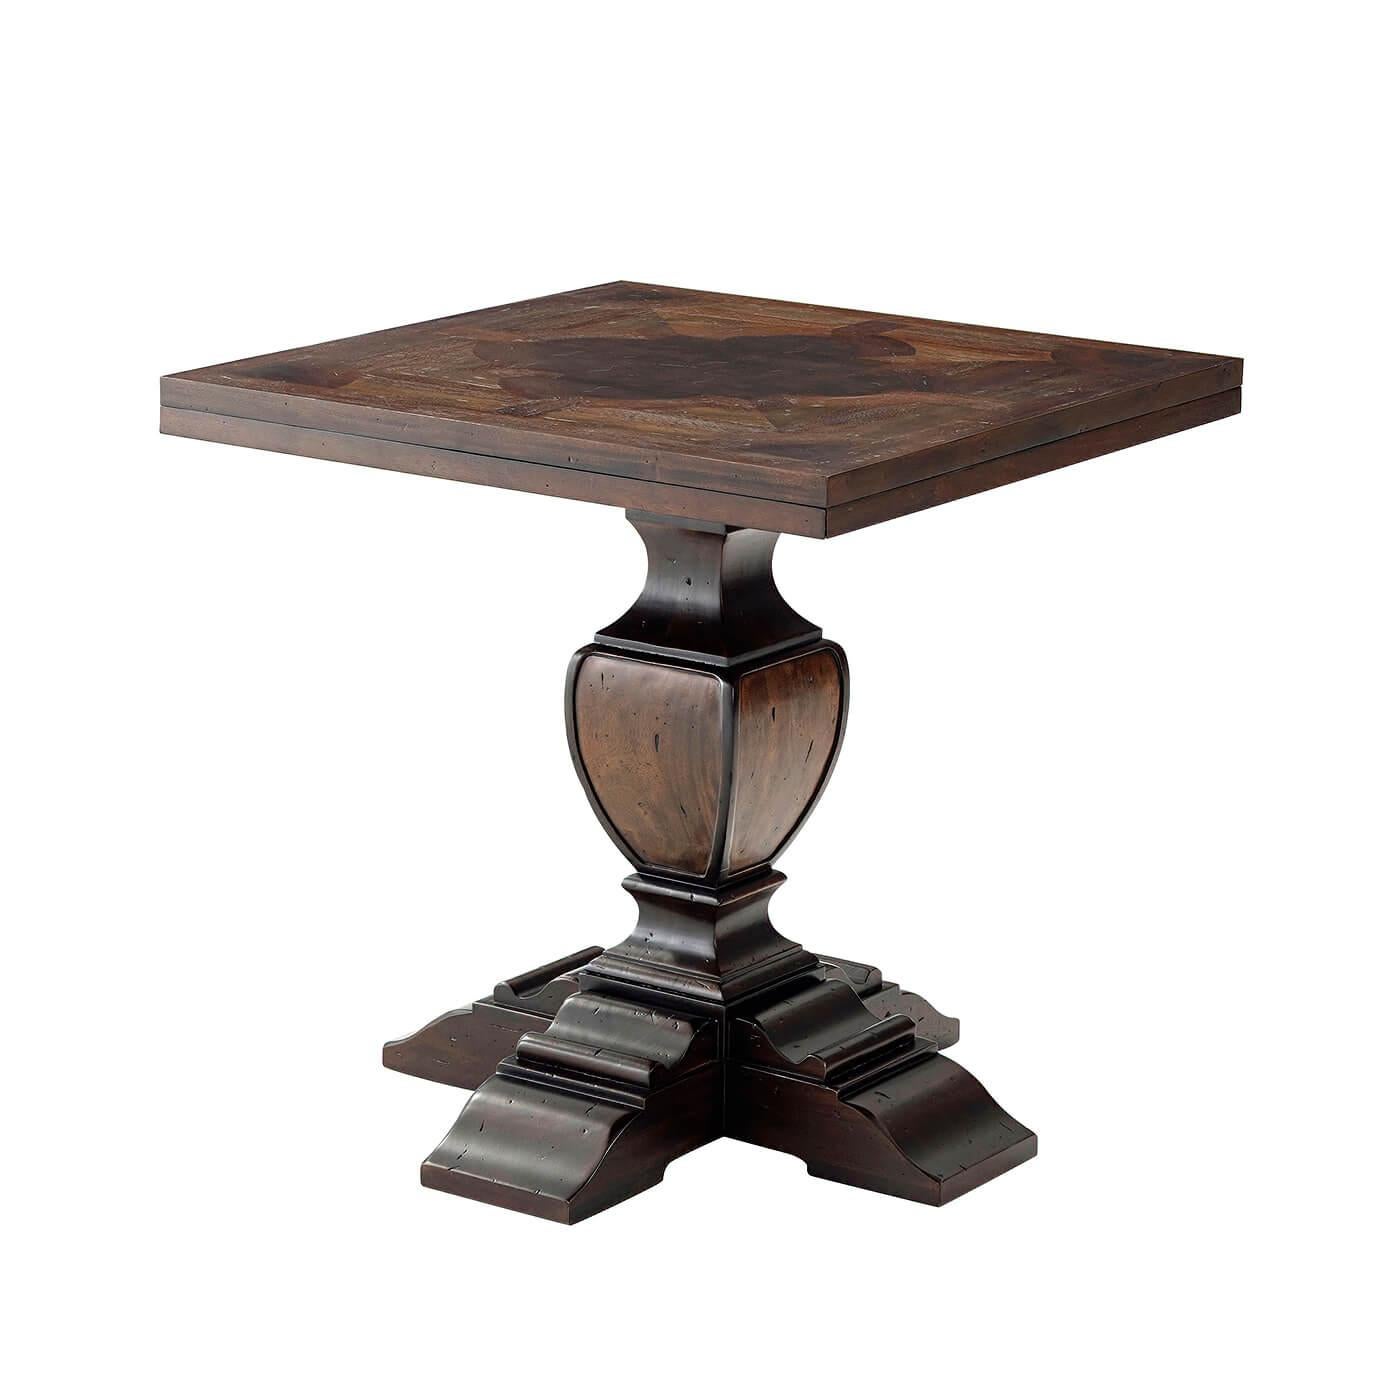 Italian Provincial drop-leaf dining table with chestnut burl, mahogany, oak & acacia parquetry. Extending from square to round with fold under leaves on a square baluster column pedestal base.
Dimensions:
Open - 42